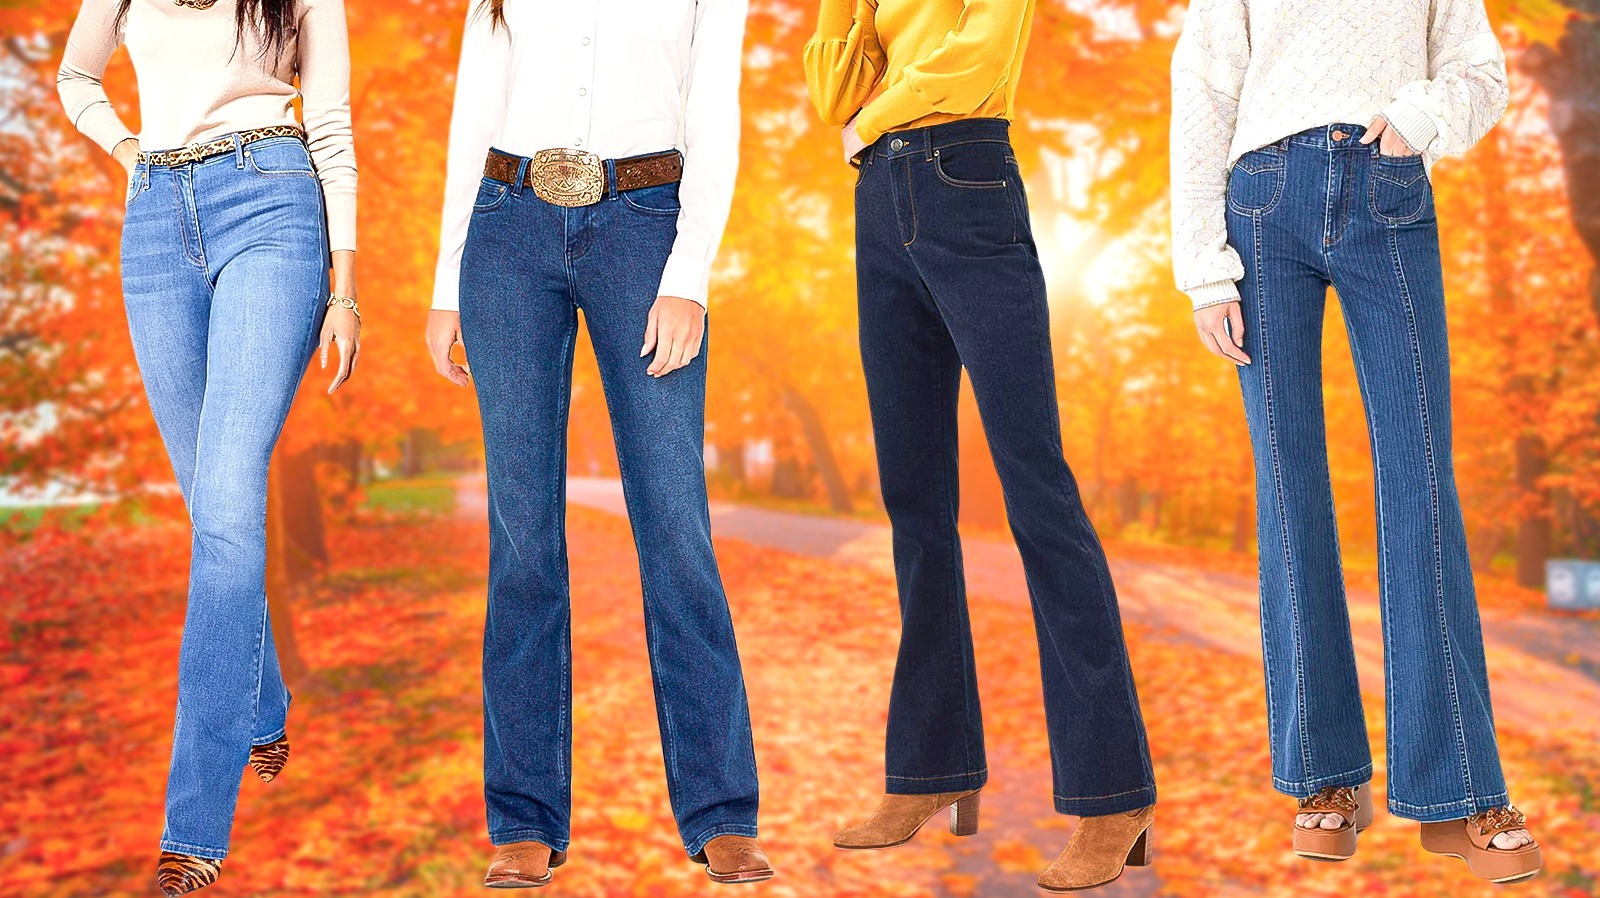 Boot-Cut Jeans Are Unexpectedly Timeless - How To Style Them For Fall 2023